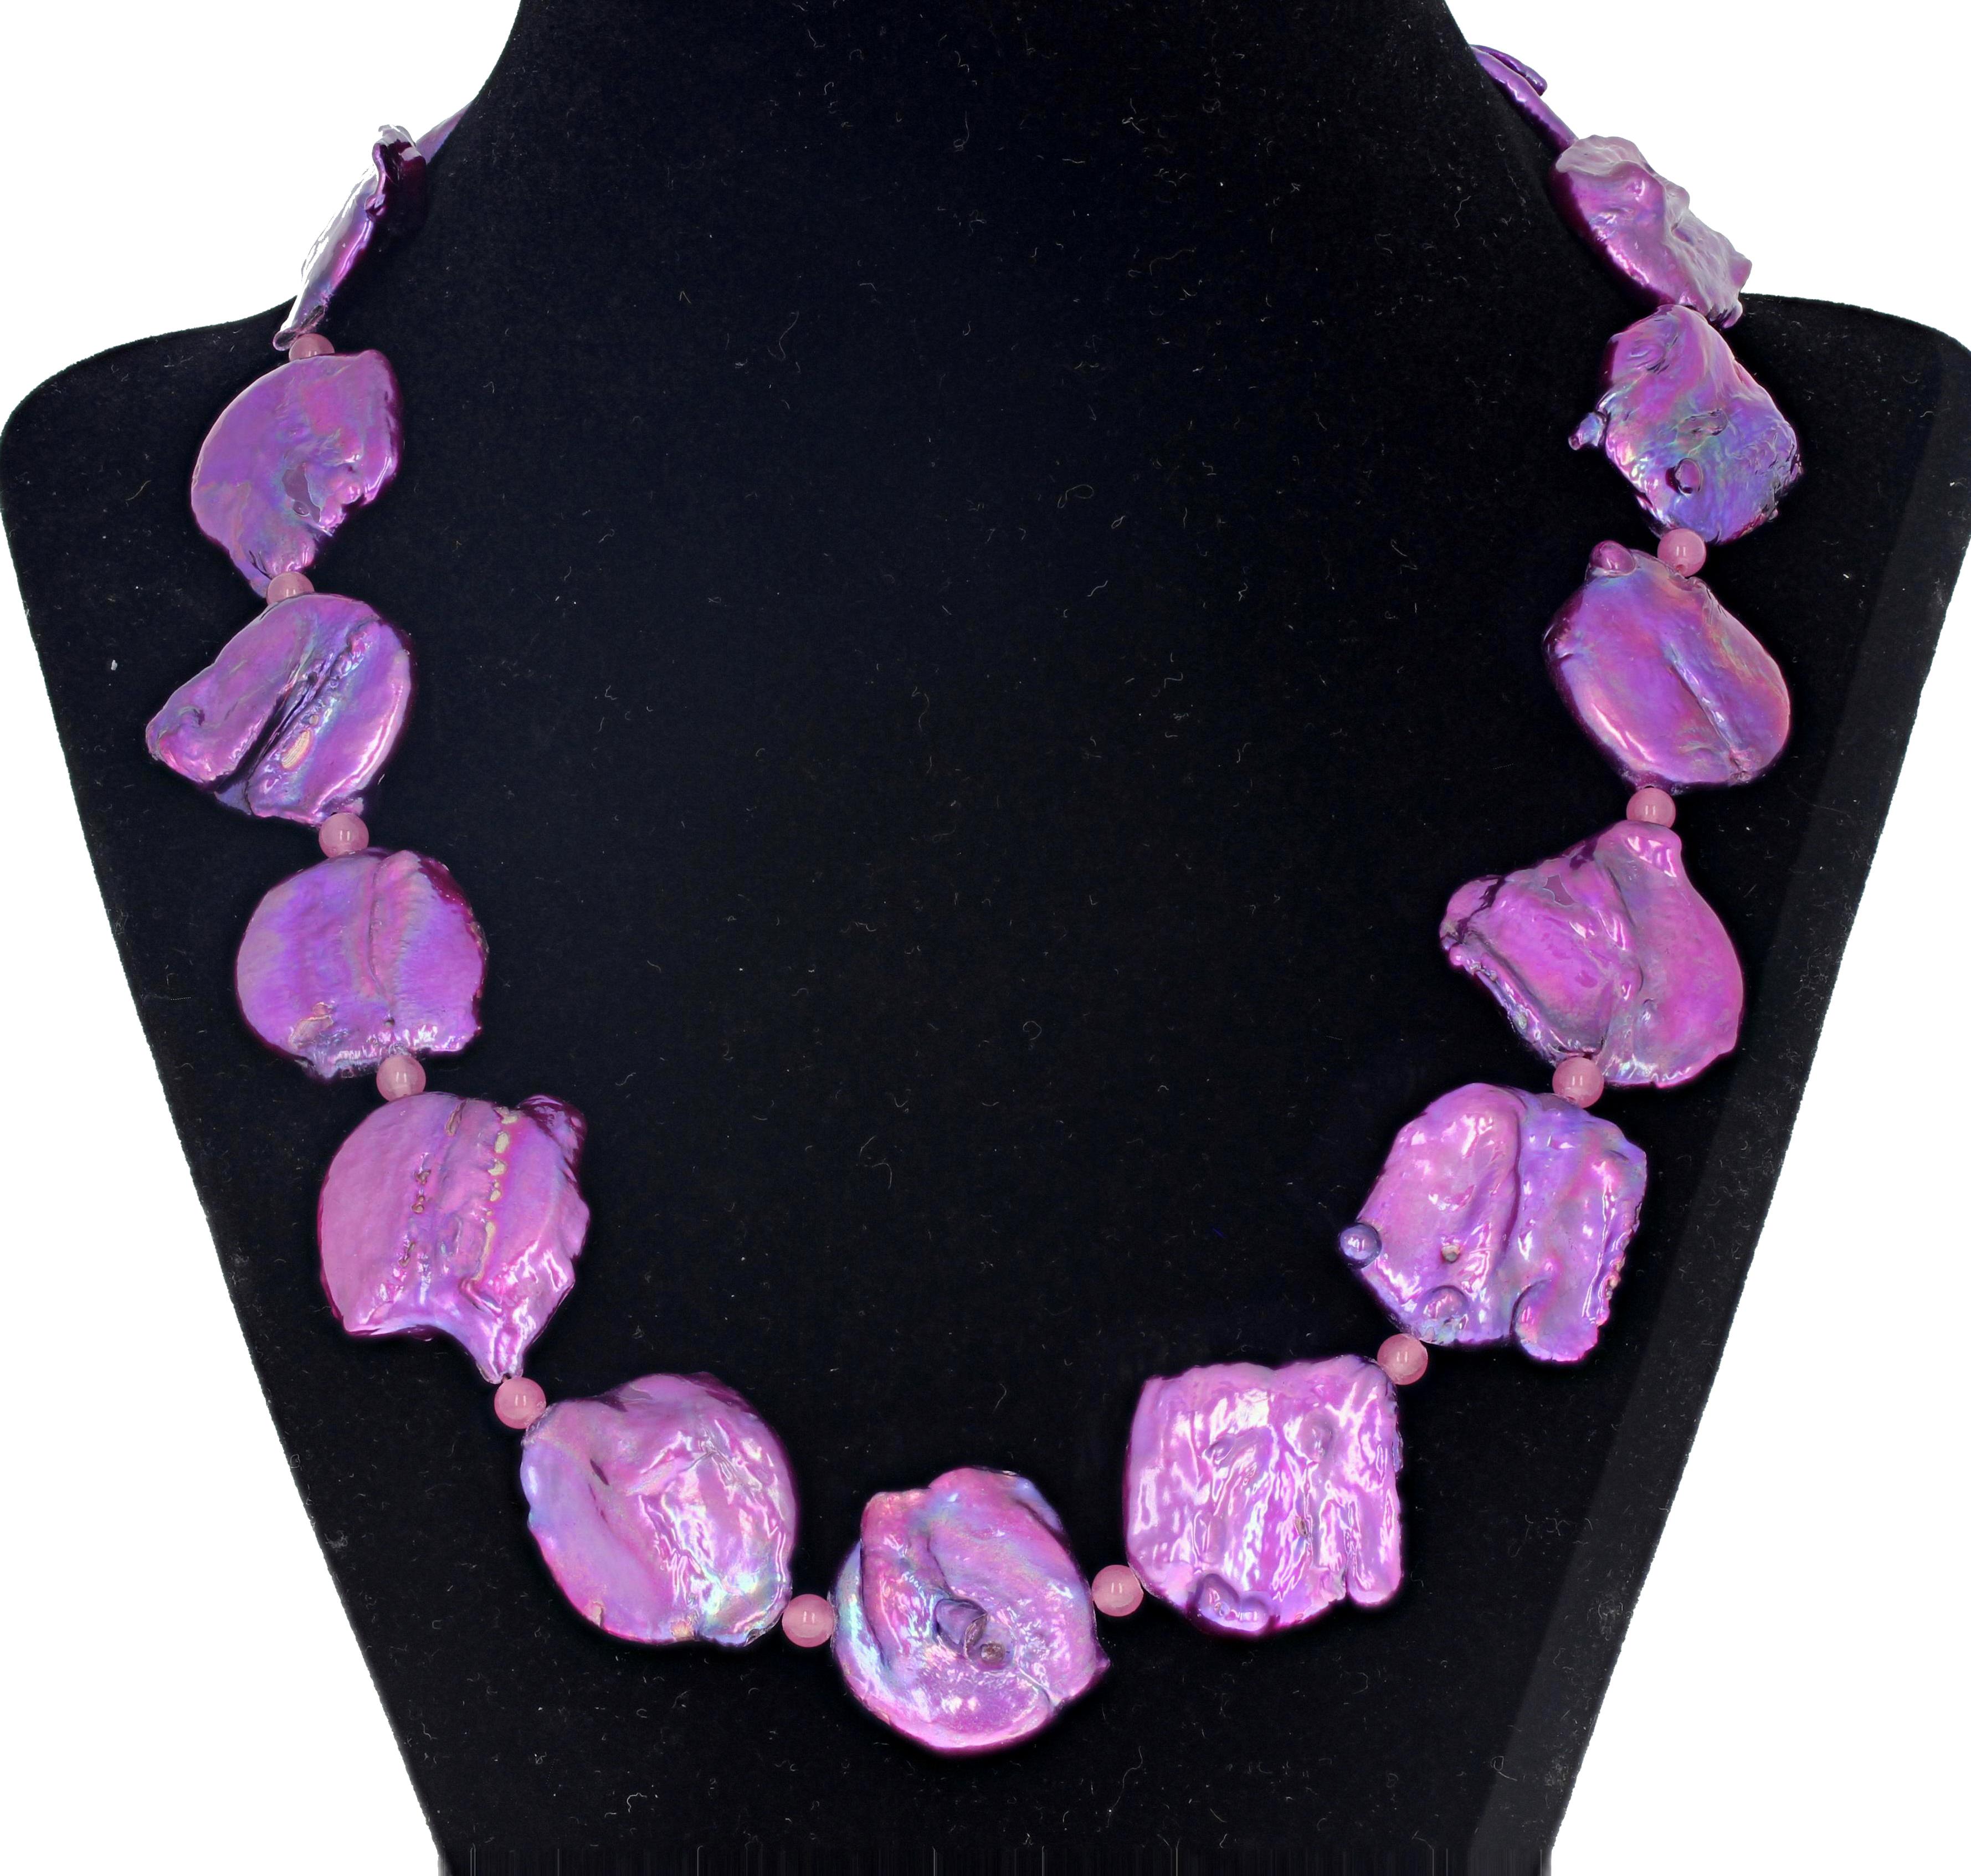 Bright glamorous pinky purple wonderfully unevenly shaped unique artistic Coin Pearls (approximately 20 mm) enhanced with small pink Rose of France Amethysts set with a goldy tone hook clasp.  This is 19 inches long and goes happily to all fun